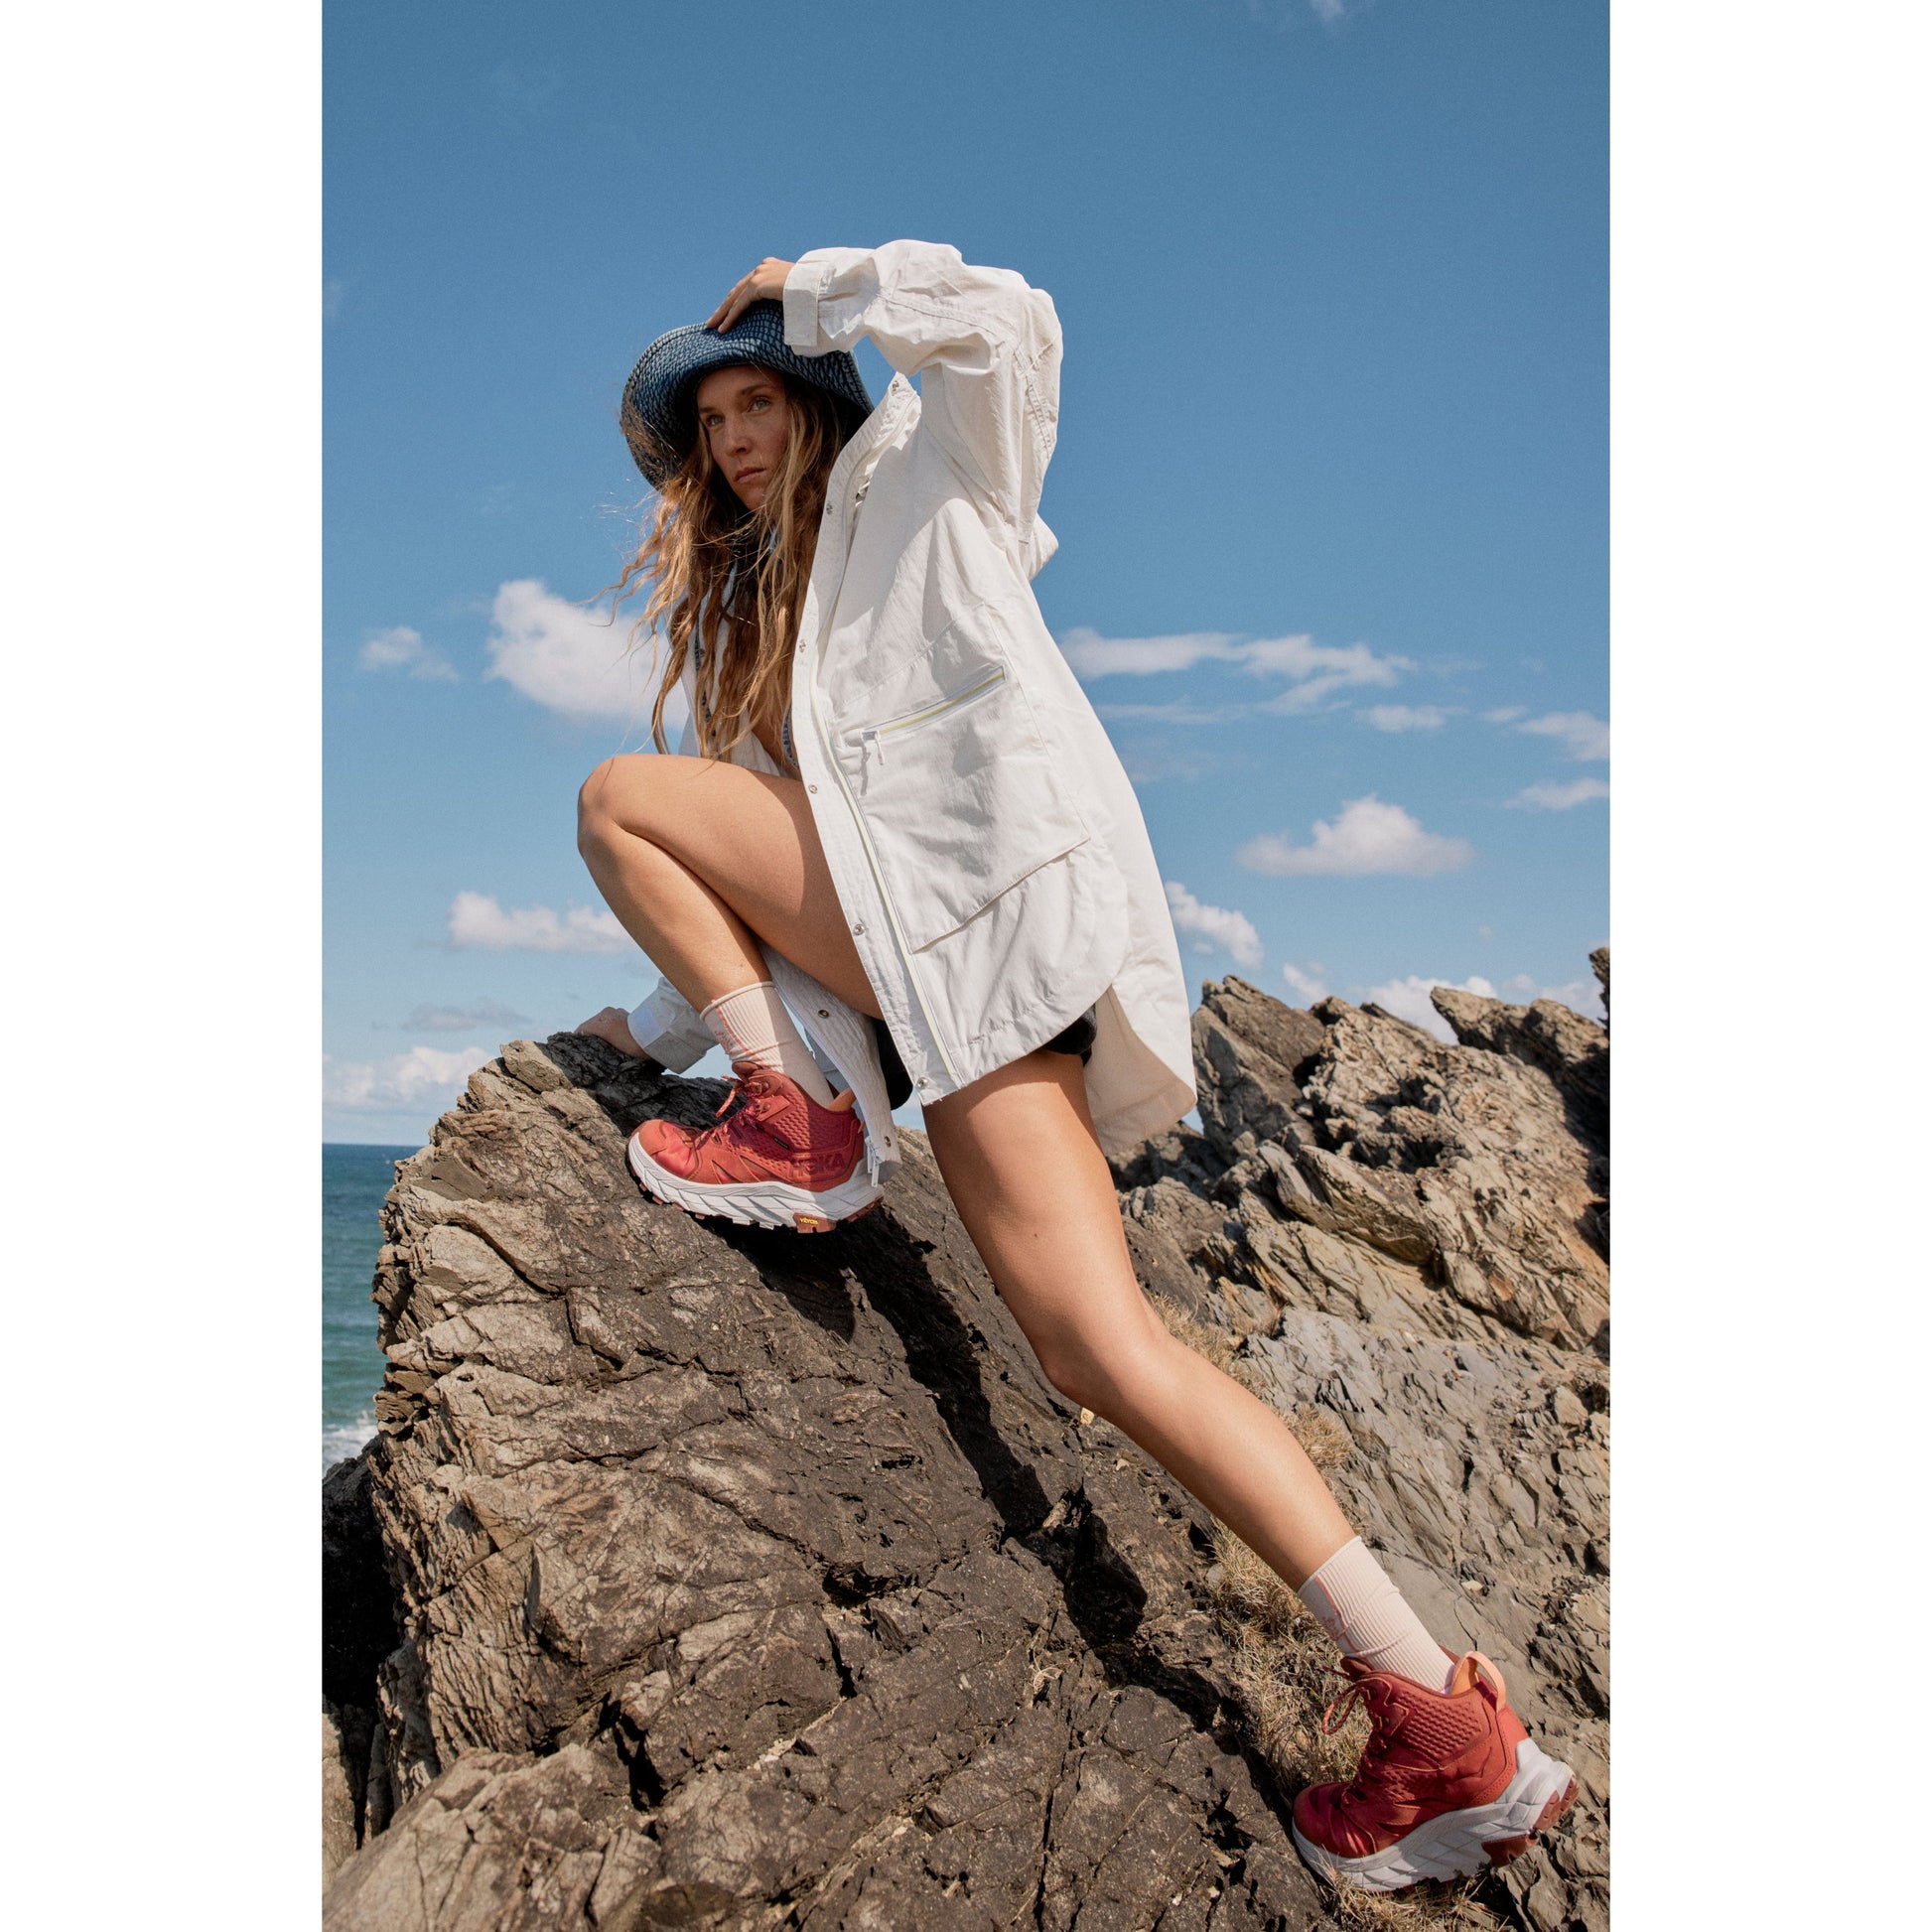 Woman in a Singin in the Rain Jacket, Painted White and red shoes posing on a rocky seaside cliff under a clear blue sky.